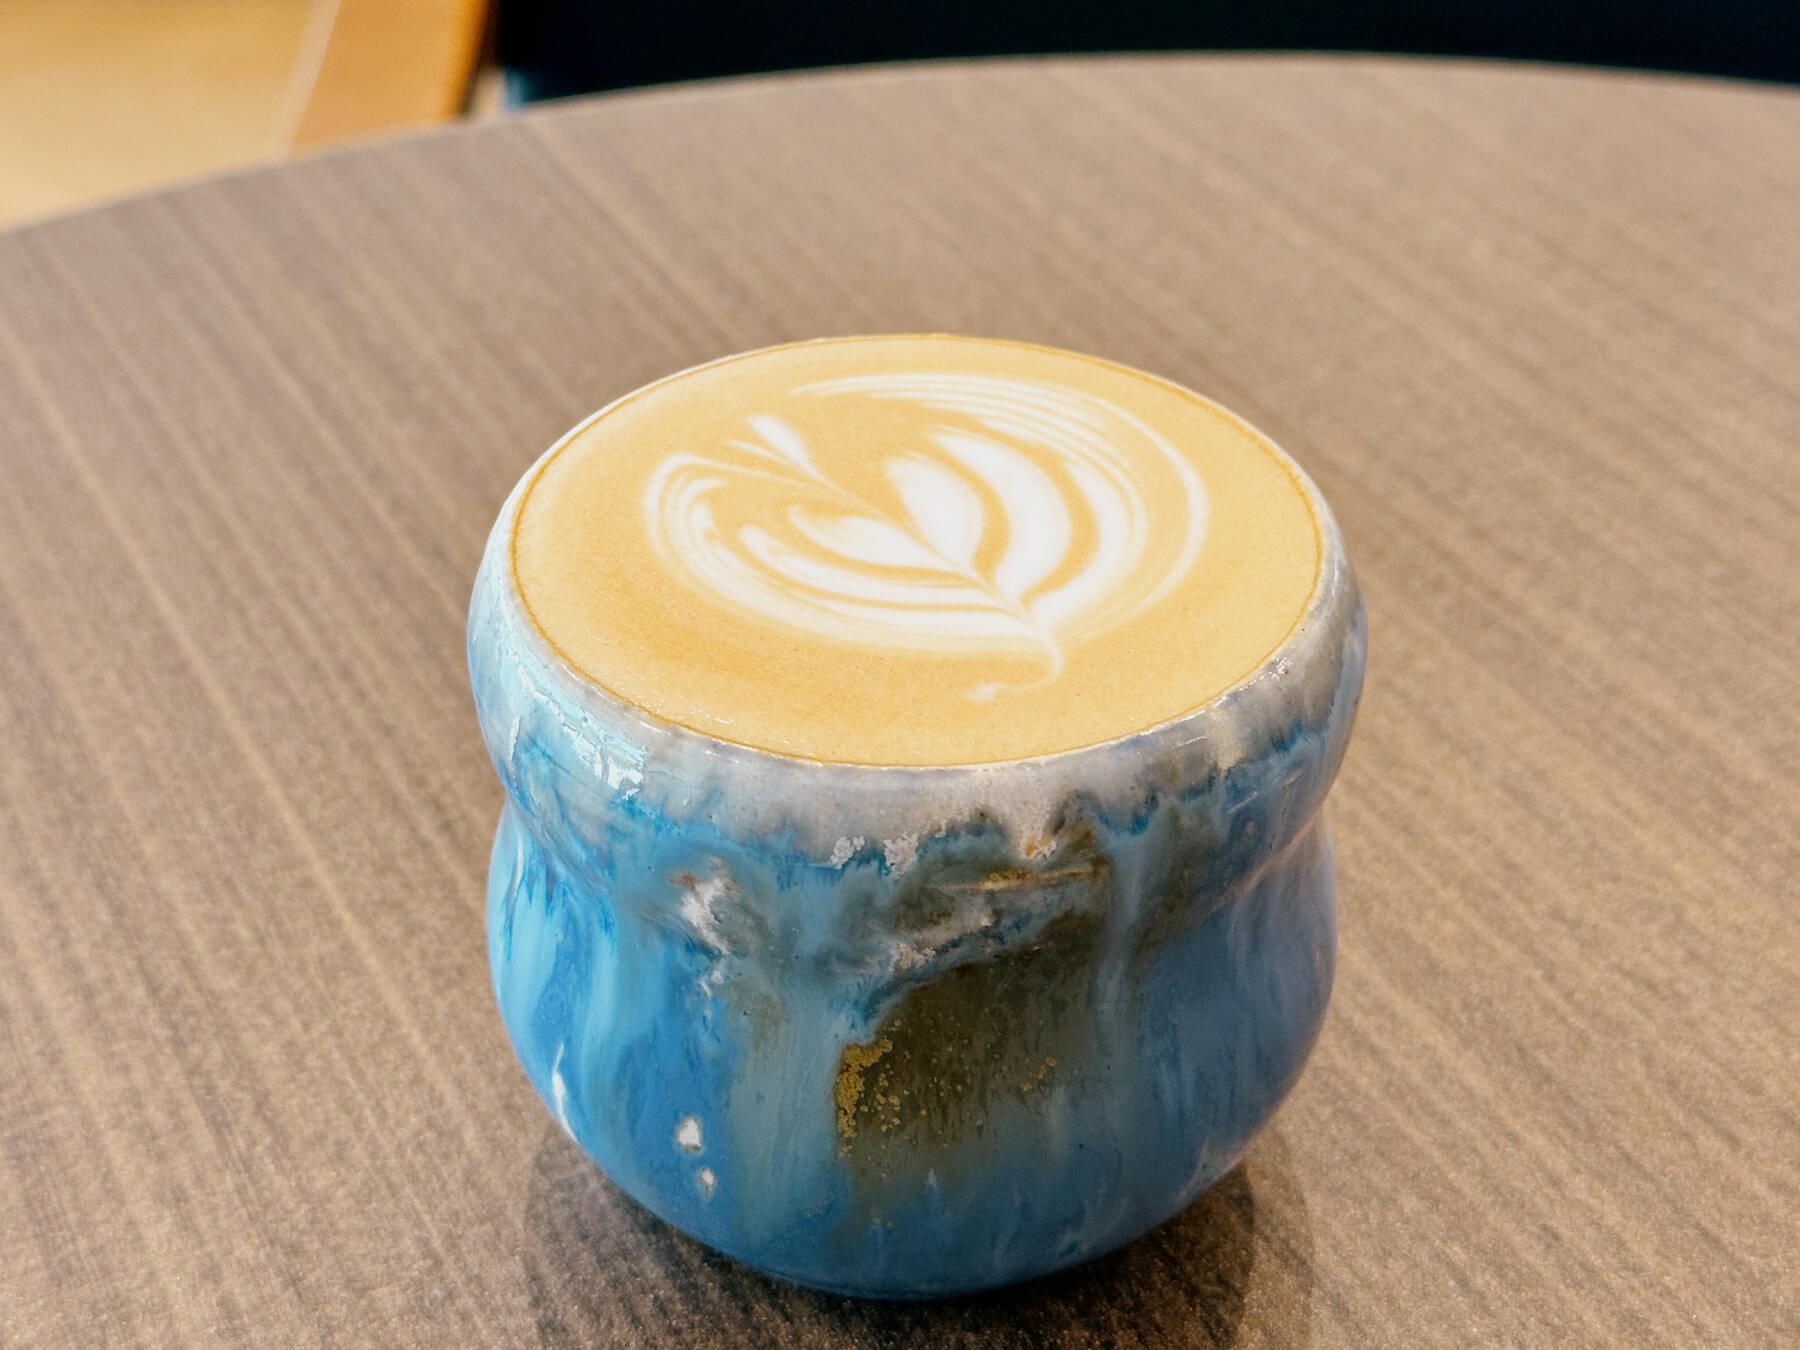 a photo of coffee in a beautiful ceramic cup on a wood table